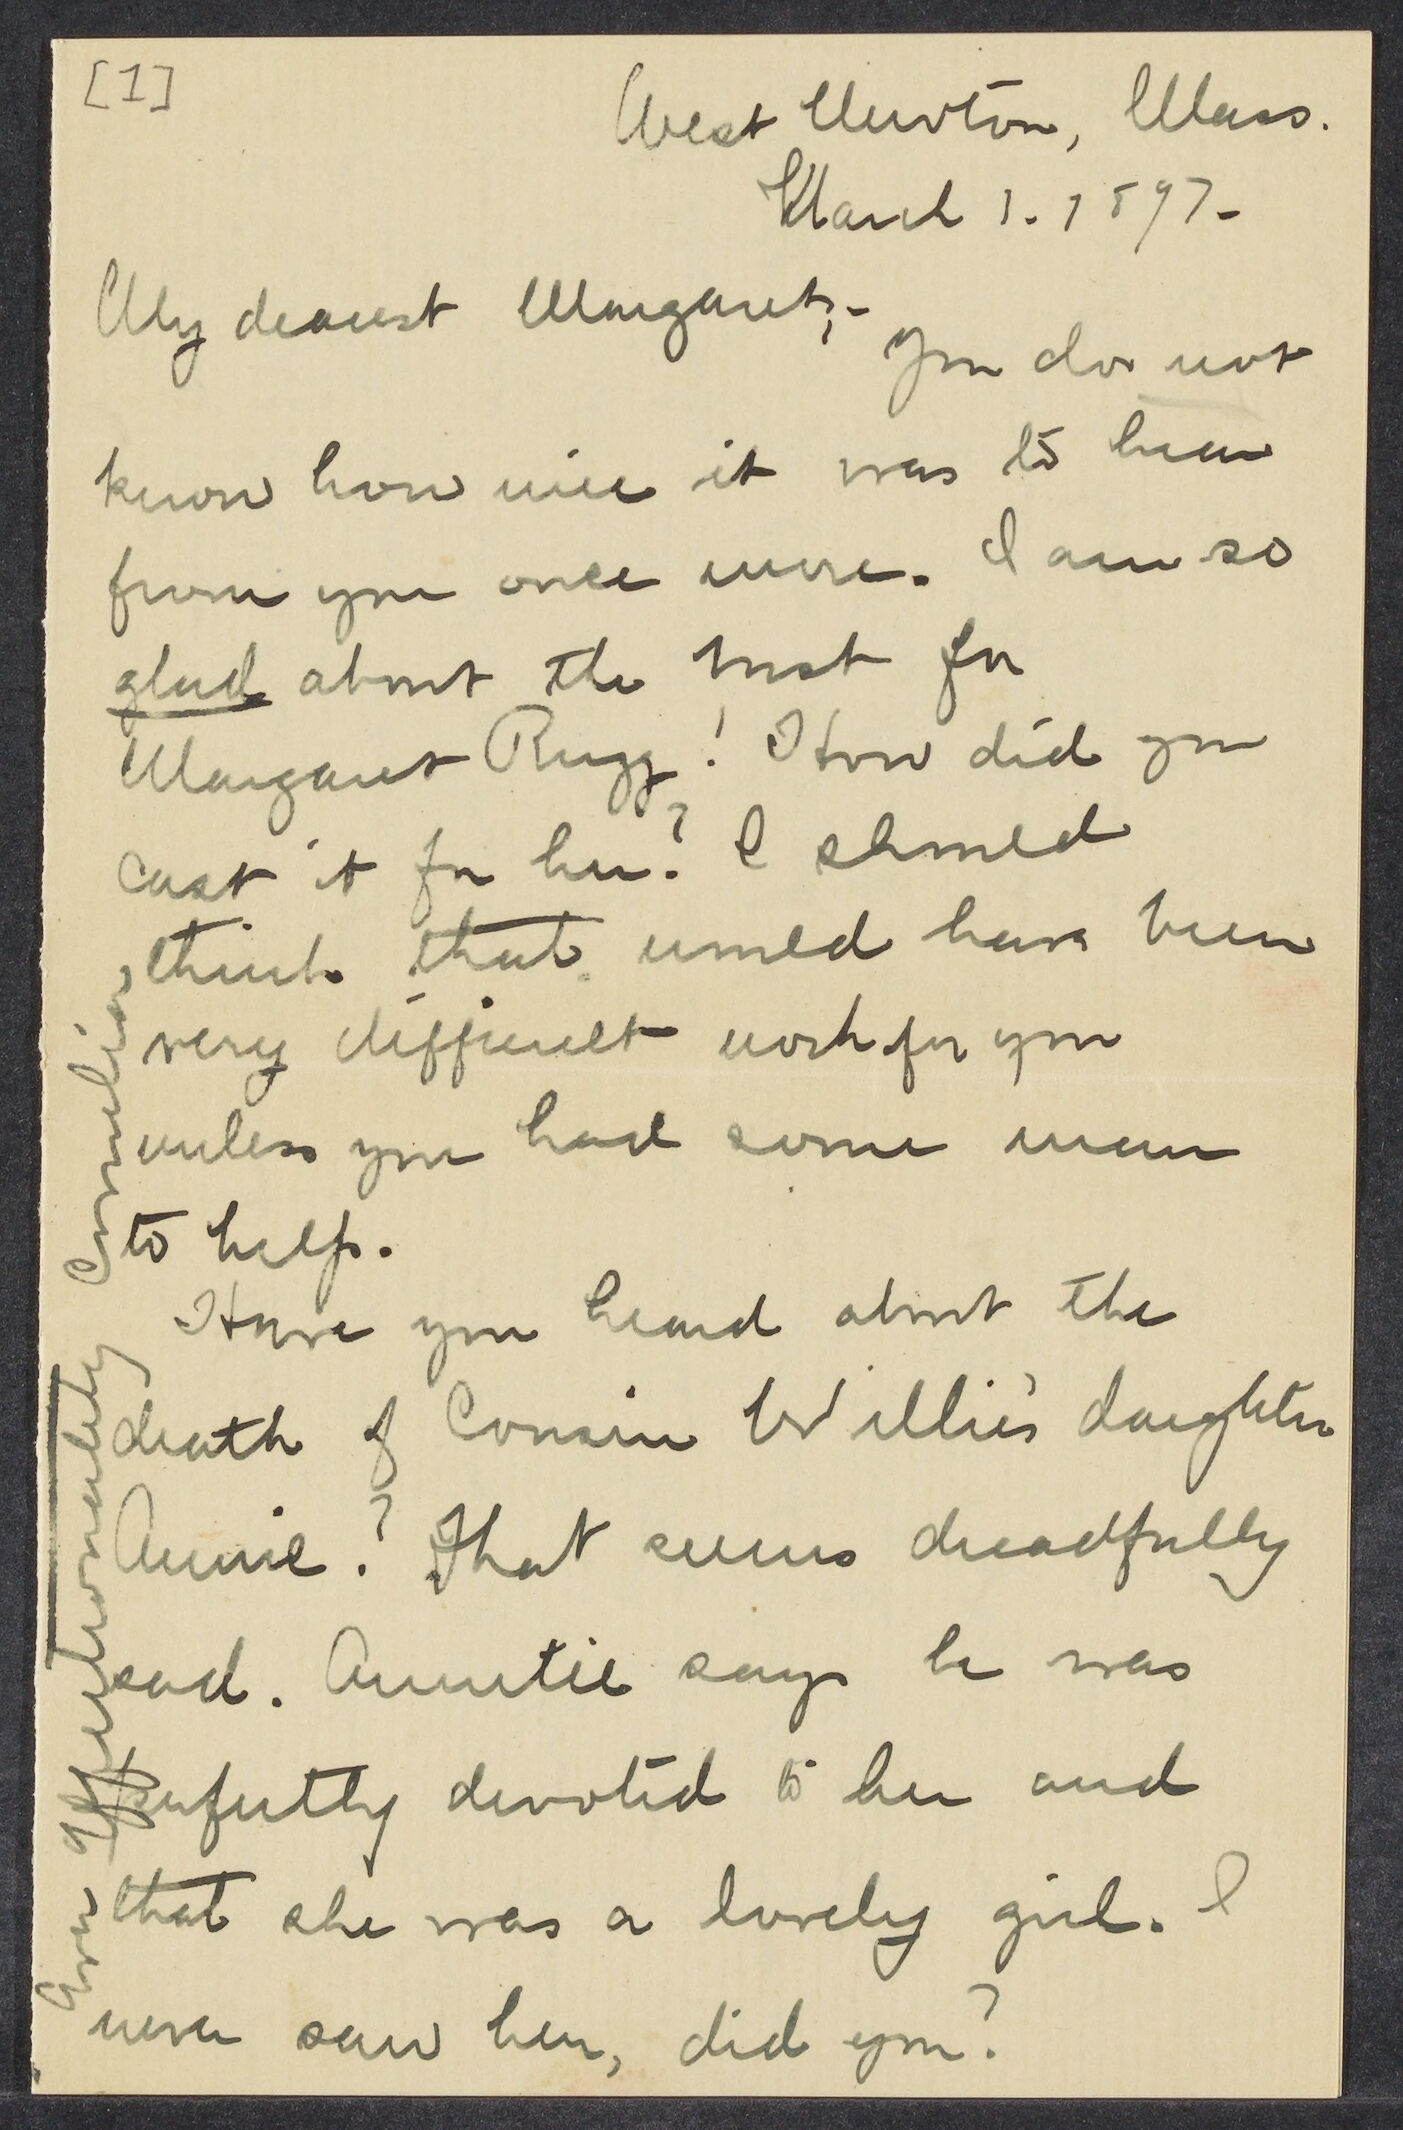 Letters from Cornelia James Cannon to her parents and siblings, March-June 1897